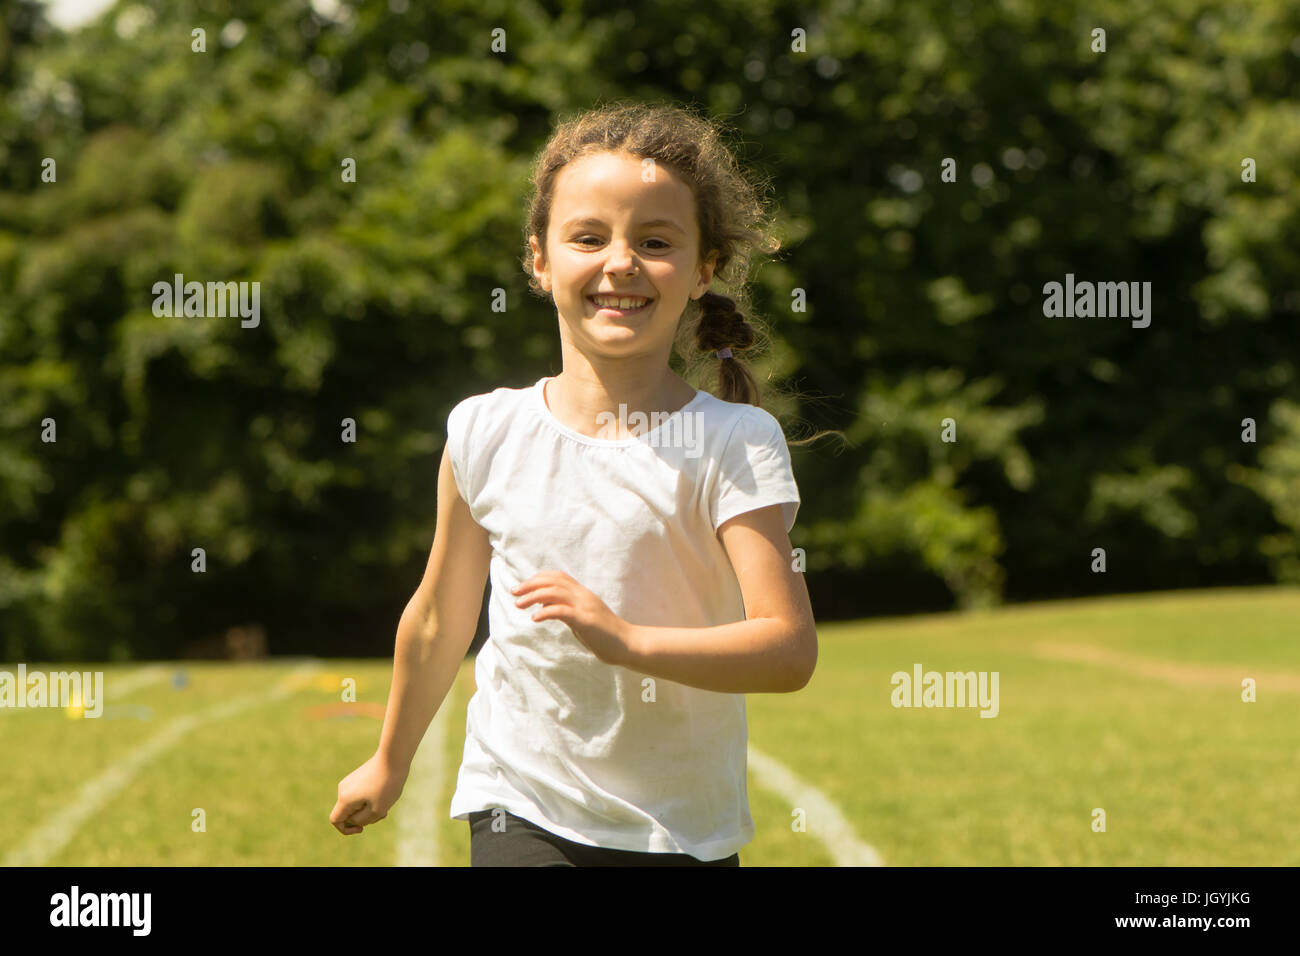 Girl running at School Sports Day. Young child sprinting hard and happily during summer traditional school event Stock Photo